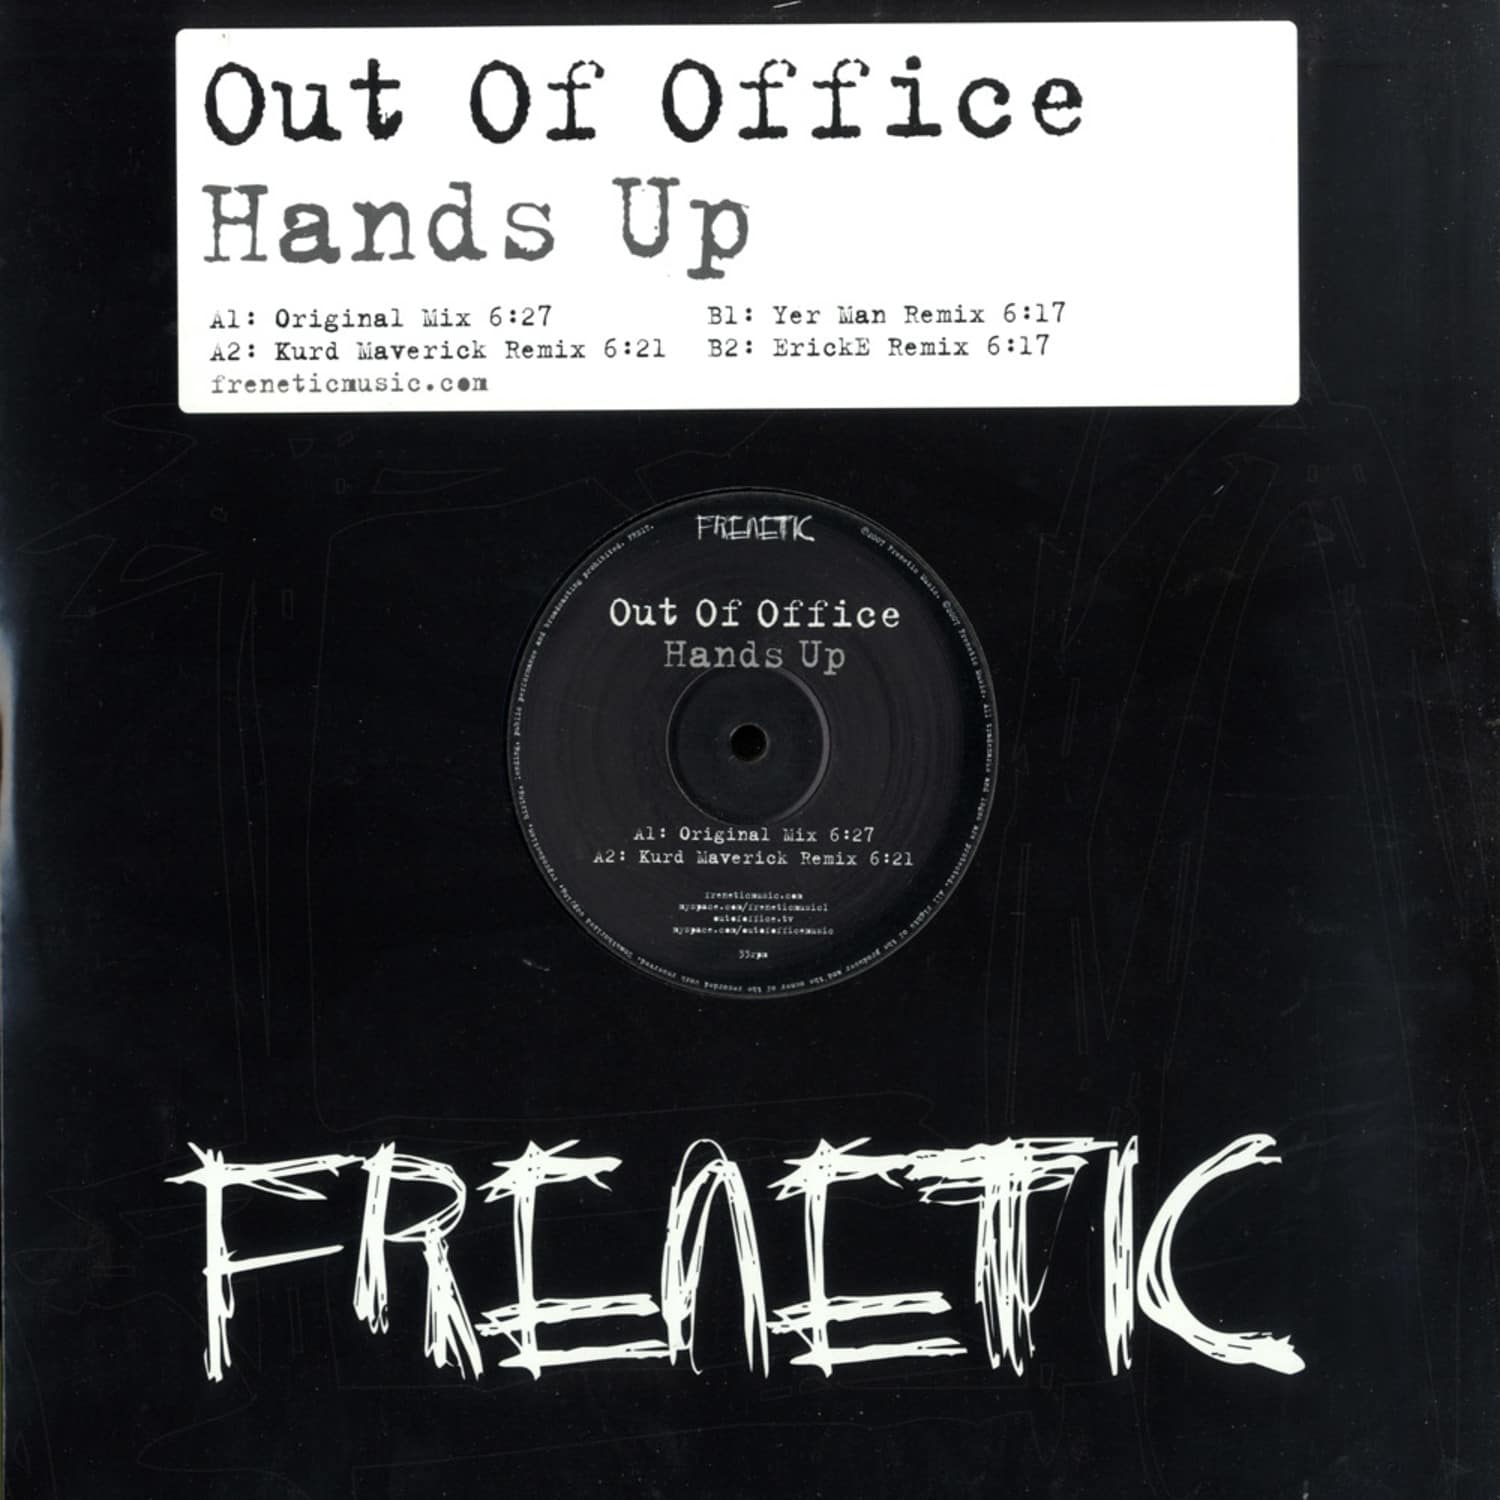 Out Of Office - HANDS UP